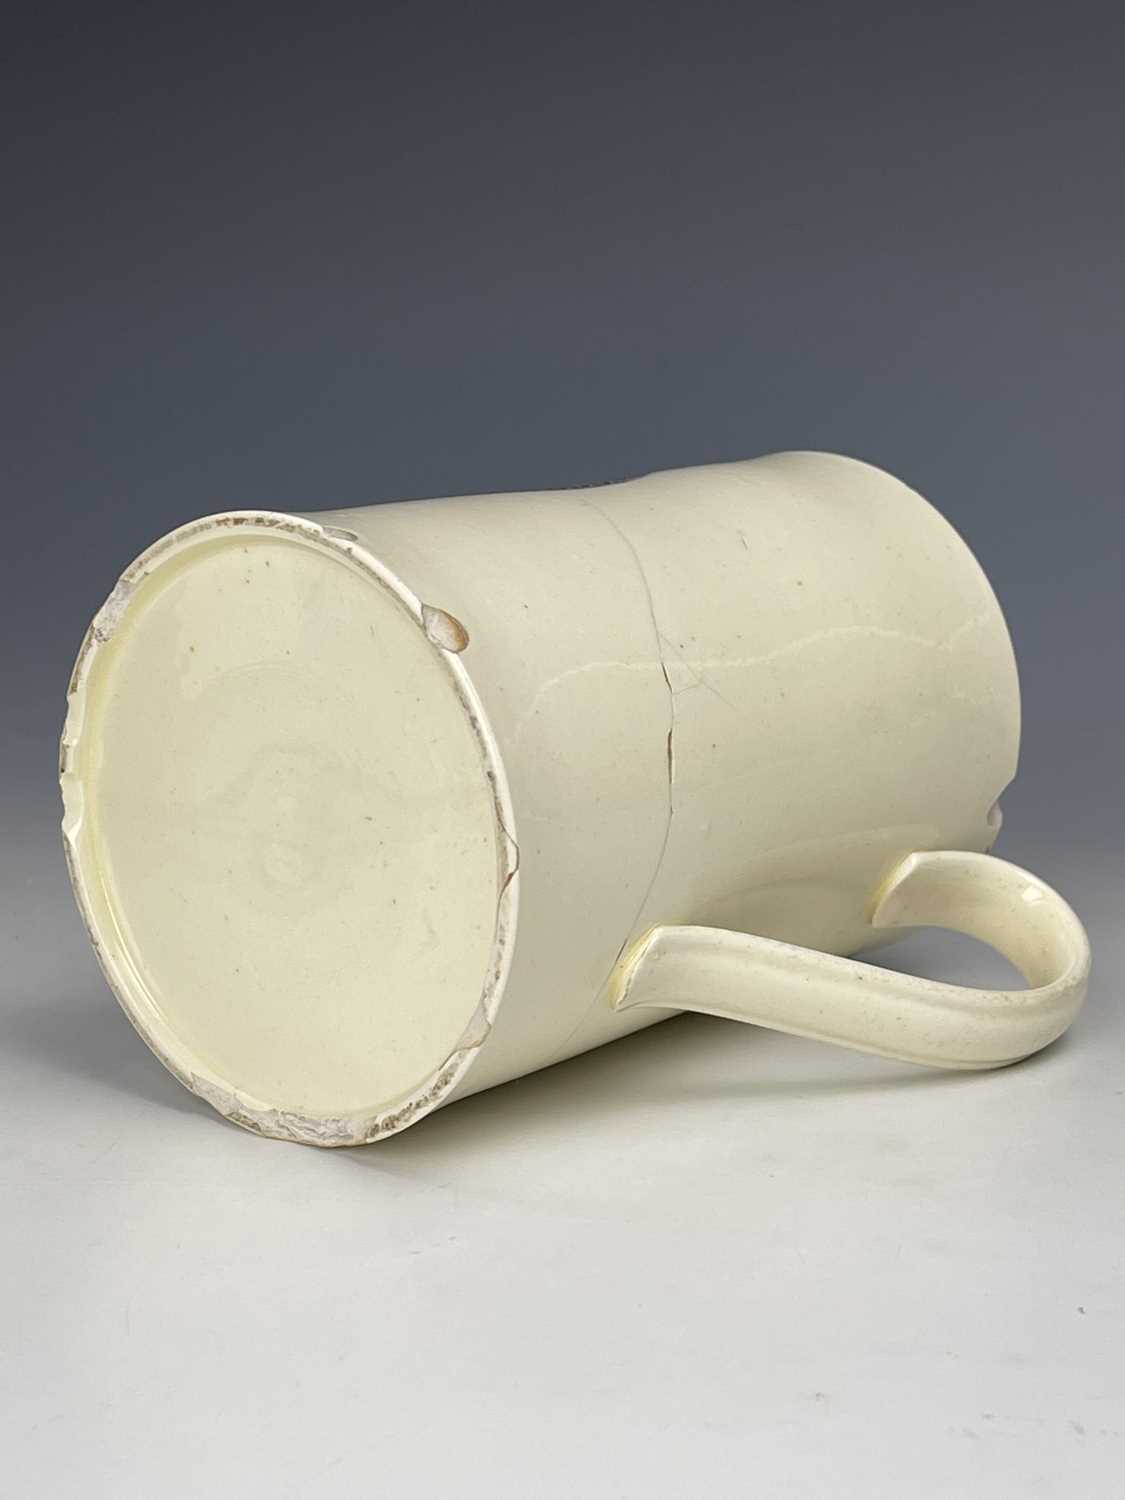 A creamware mug, circa 1780, transfer printed with a satirical inverted 'Jack Tar and Wapping - Image 3 of 4